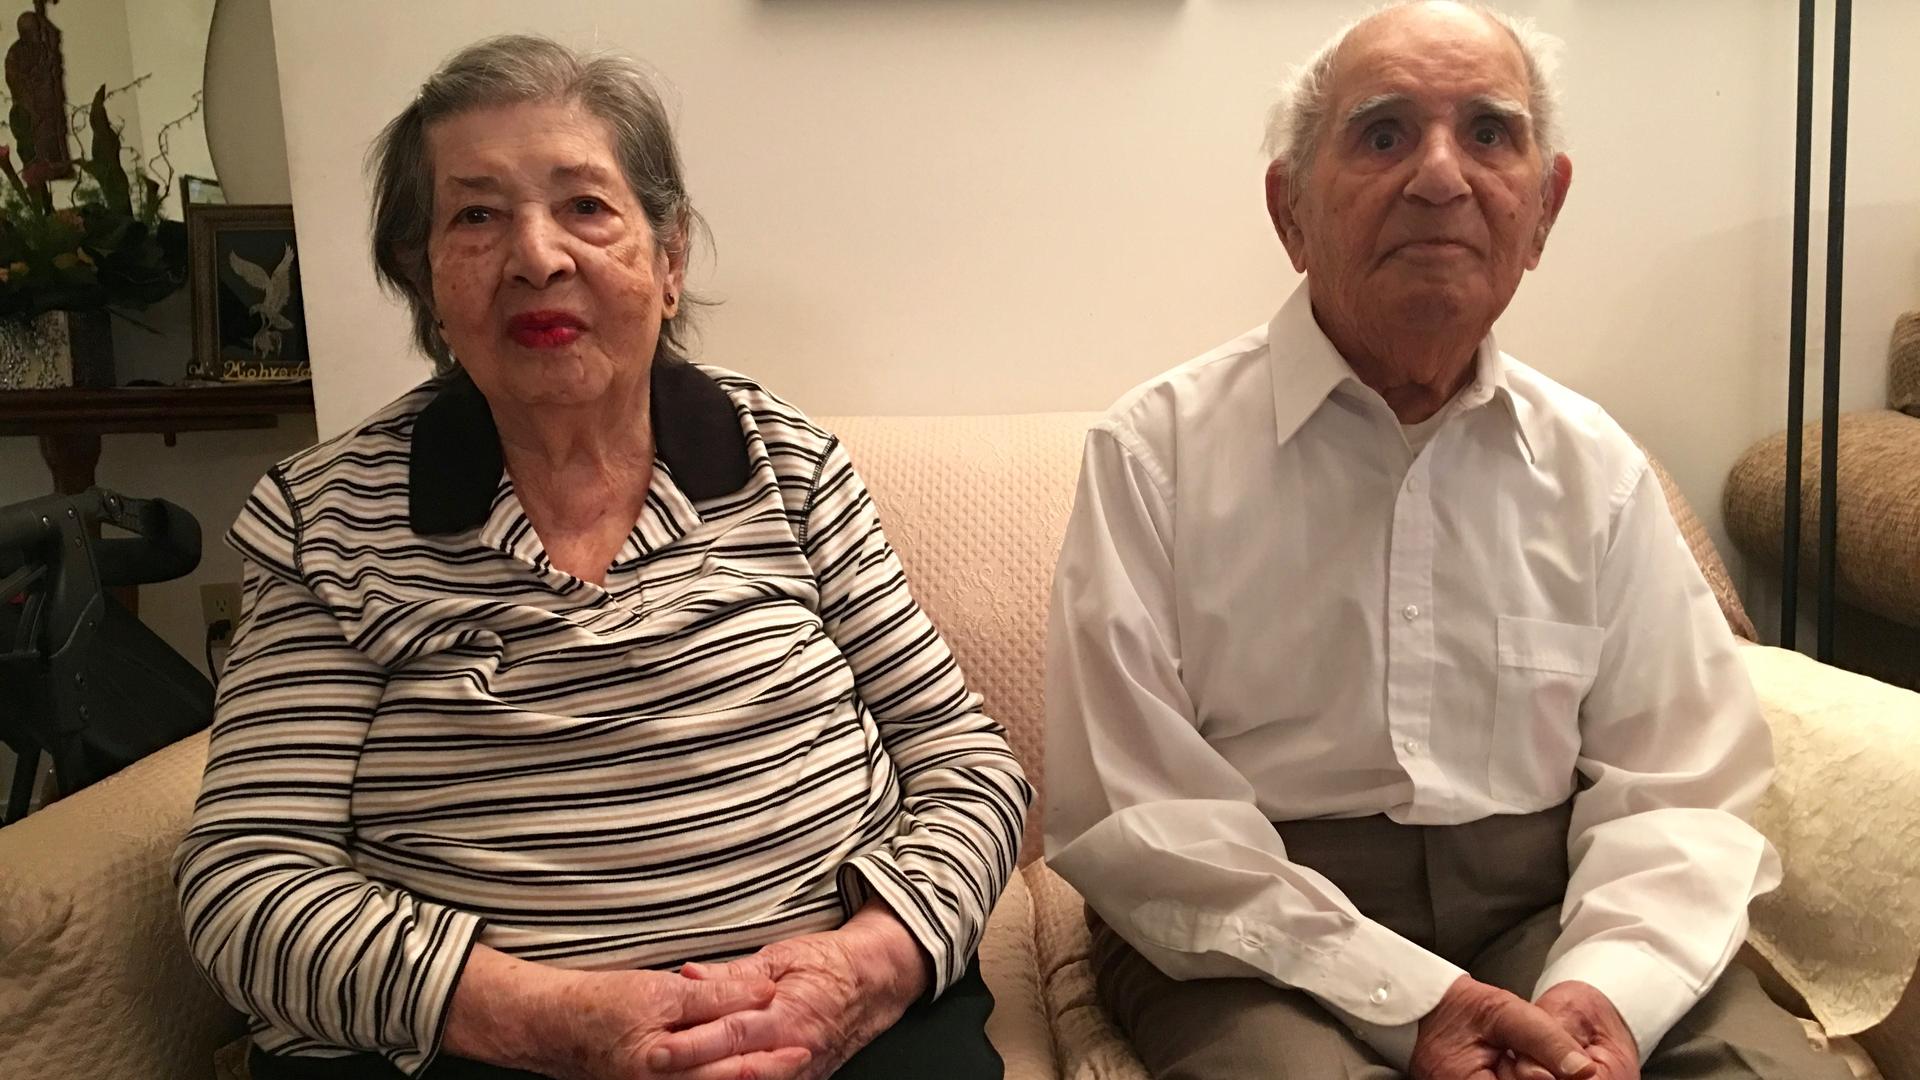 Ashraf Mohyeddin just turned 100 and her husband Mohammad in 110. They were born in Tafresh, in the mountains of central Iran and today they live in Toronto.